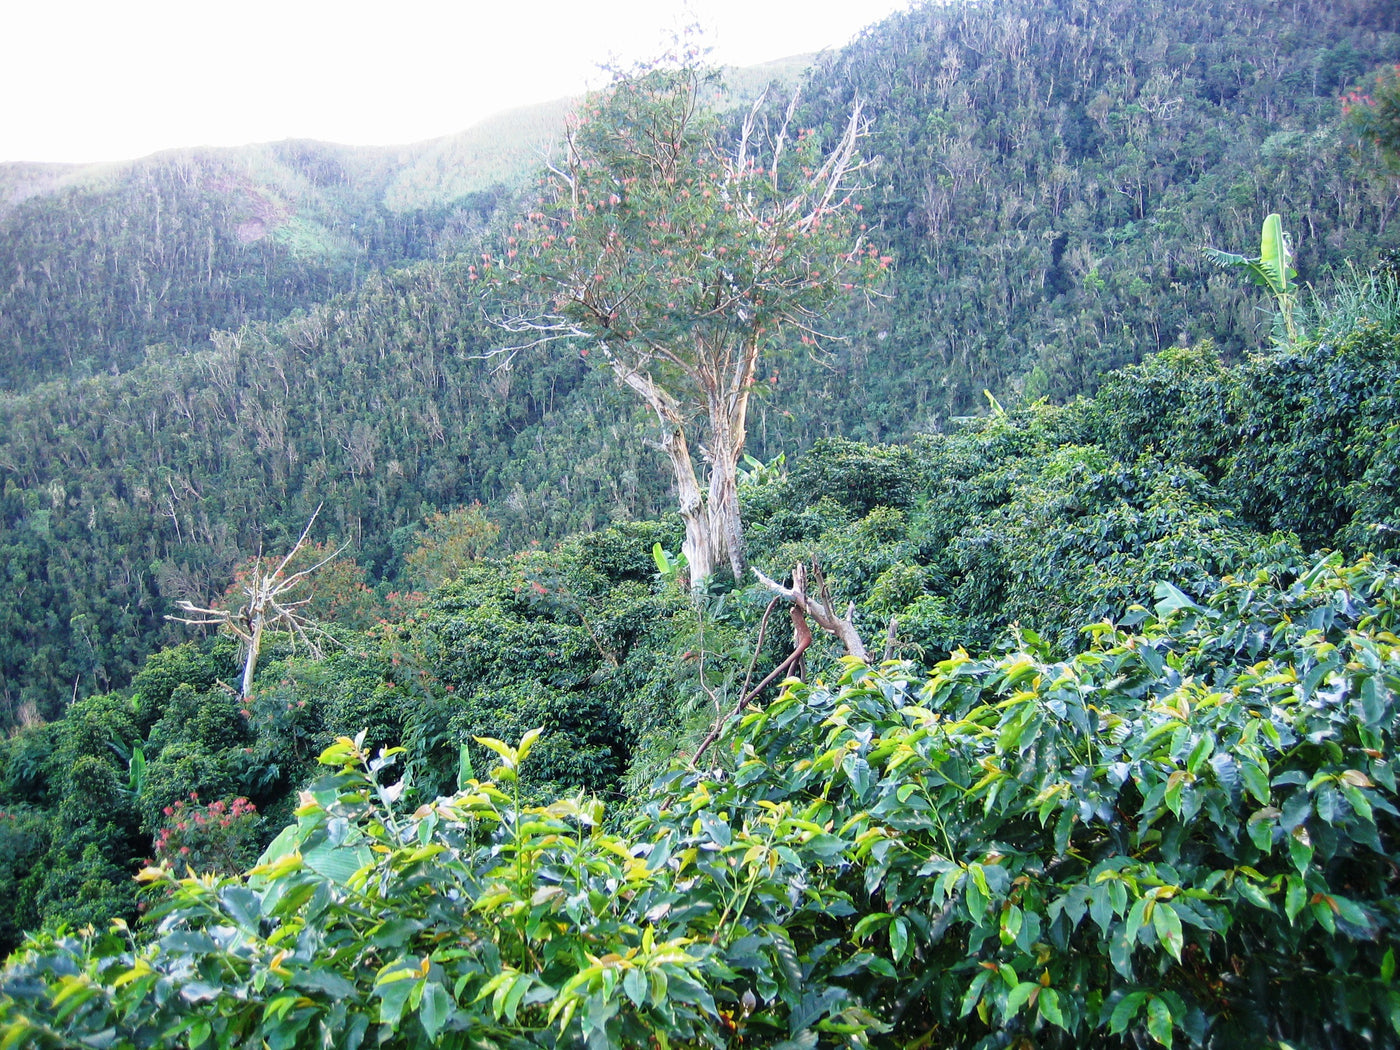 Coffee plants growing on an incline in the Jamaican Blue Mountains